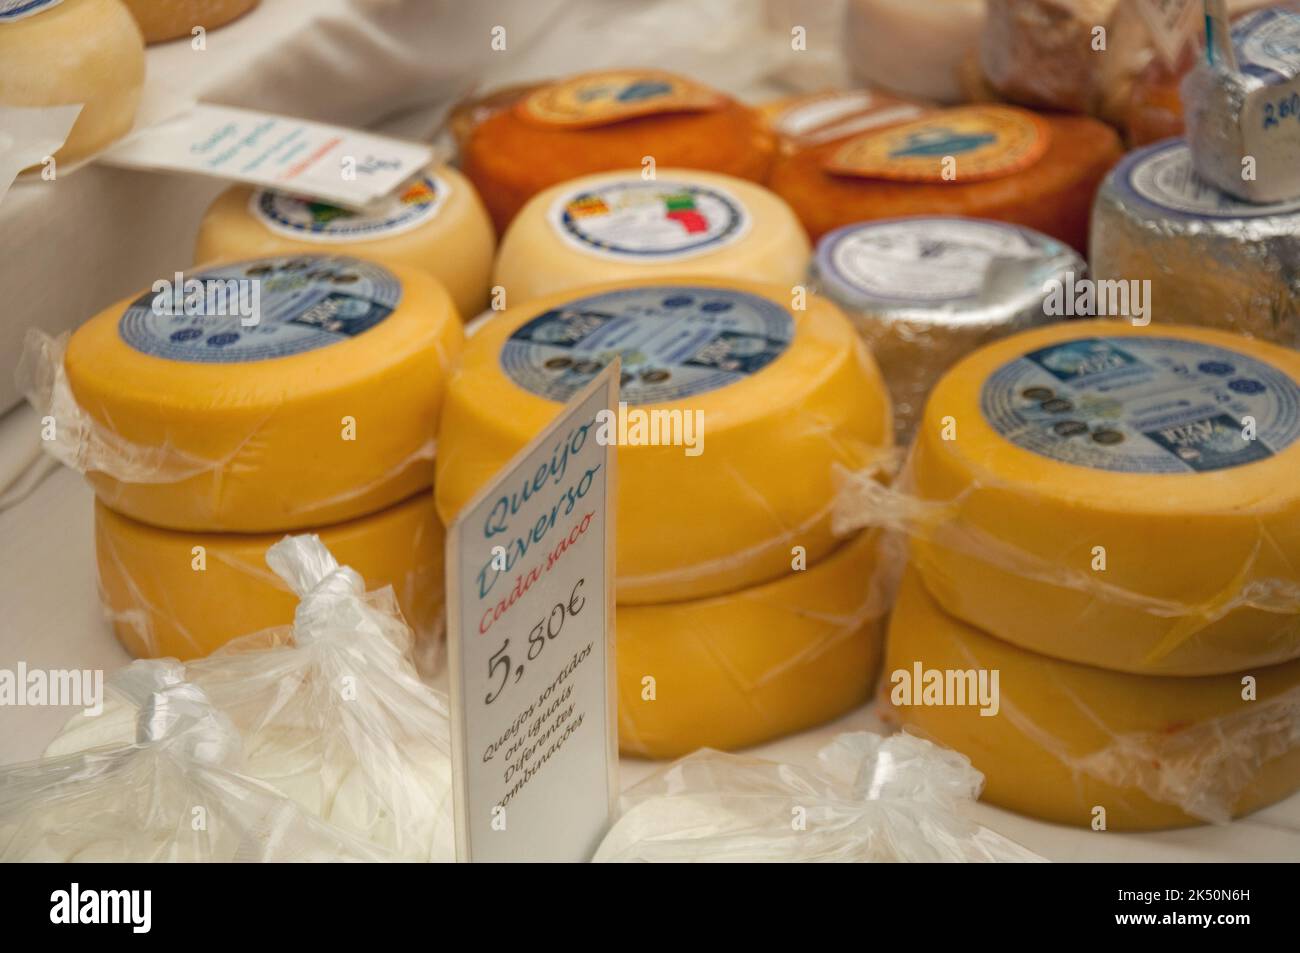 Cascais Municipal Market, Cascais, Portugal - various cheeses wrapped in plastic Stock Photo